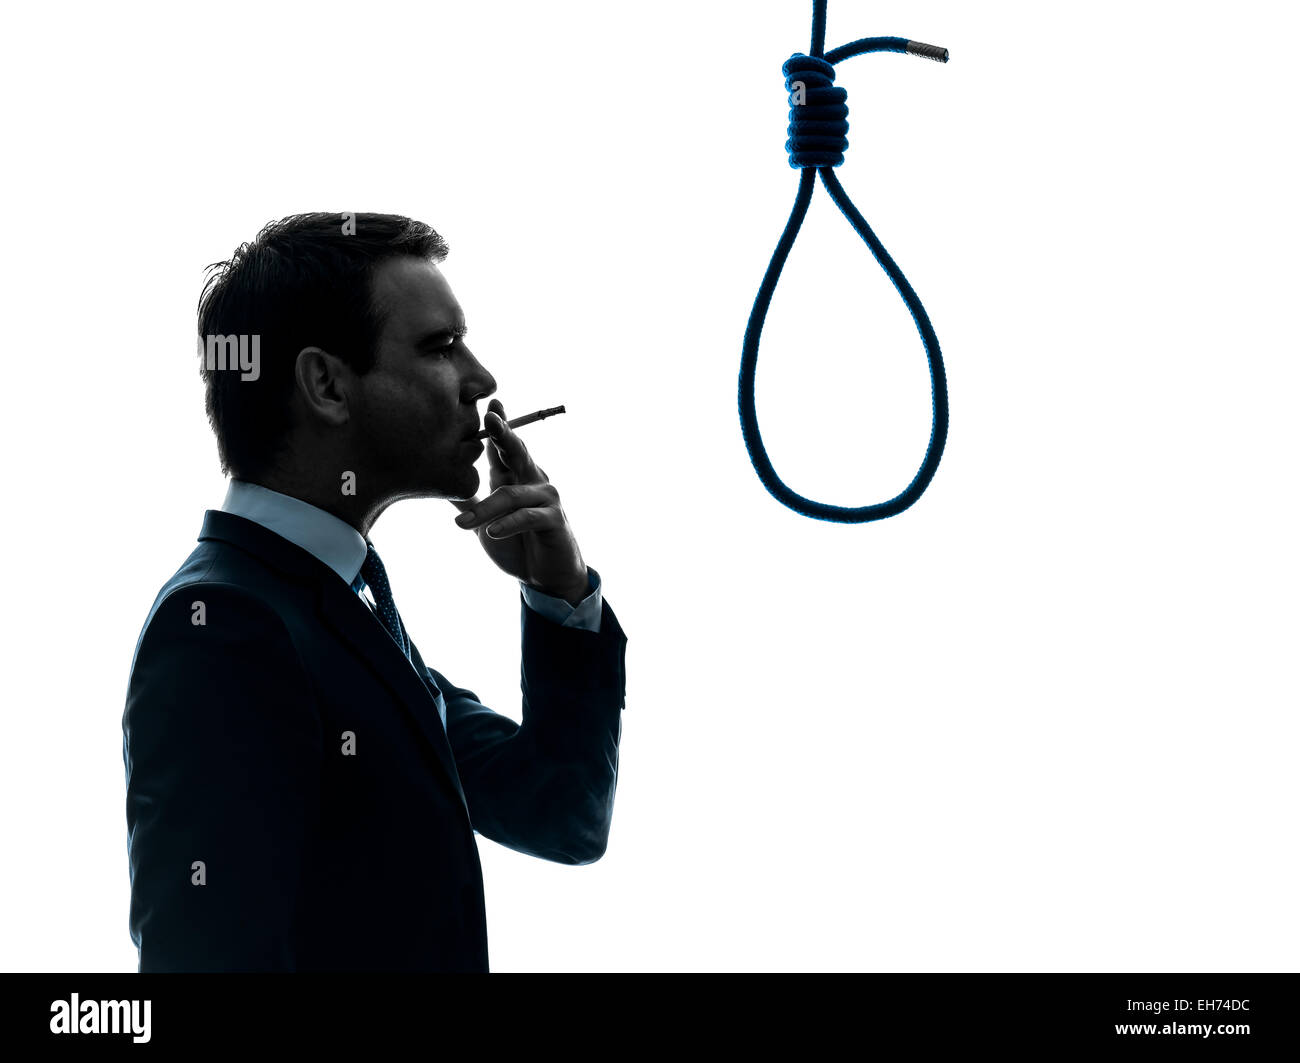 one  man smoking cigarette standing in front of hangman's noose in silhouette studio isolated on white background Stock Photo